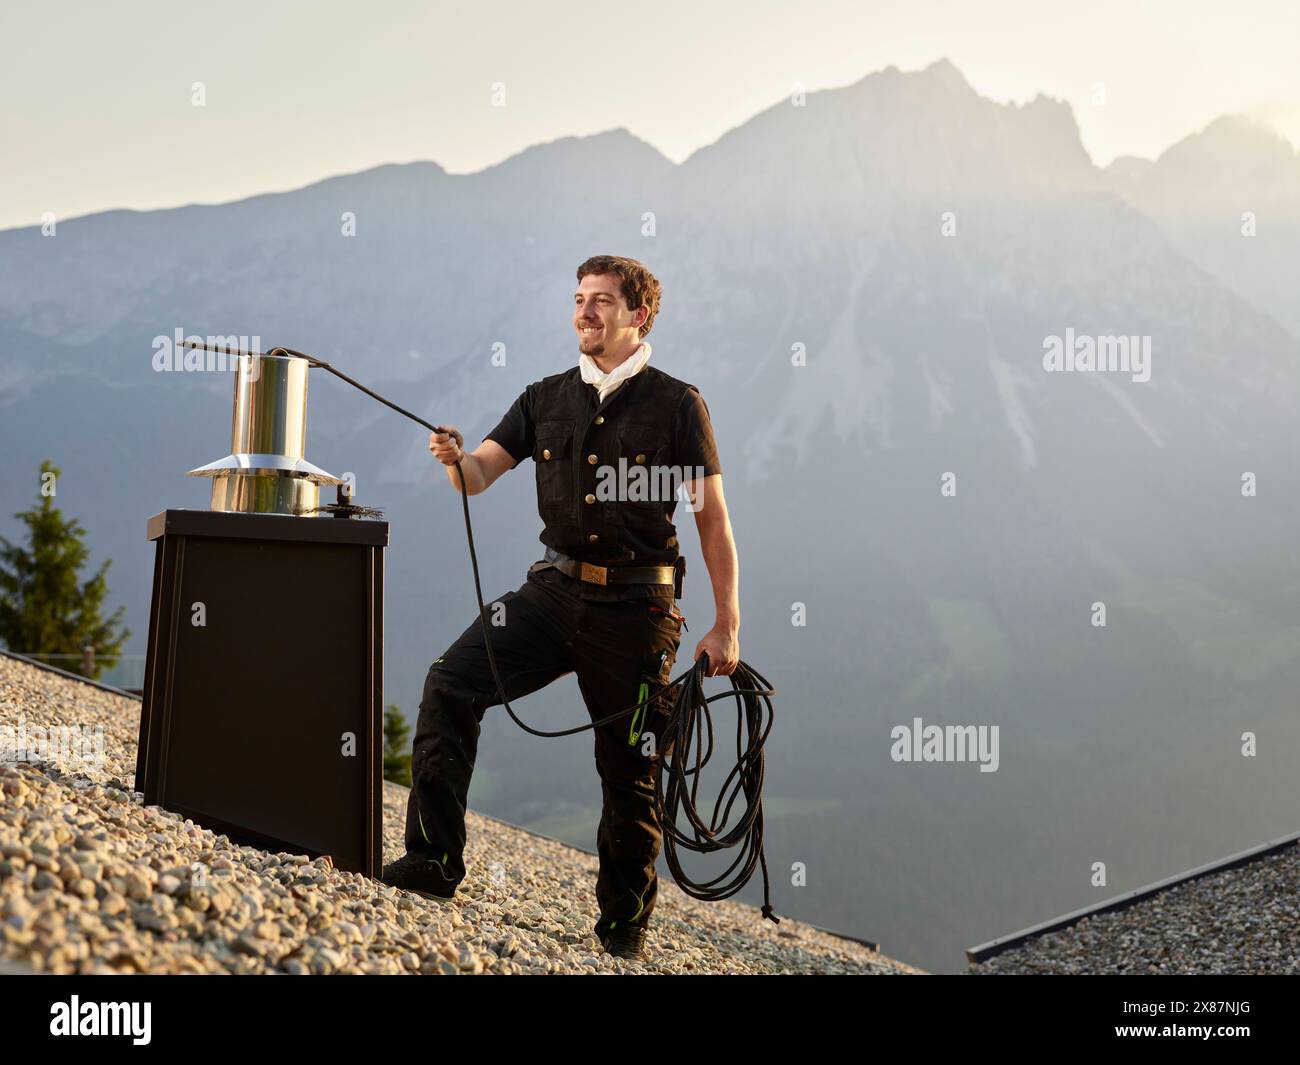 Smiling chimney sweeper servicing chimney on rooftop at sunrise Stock Photo